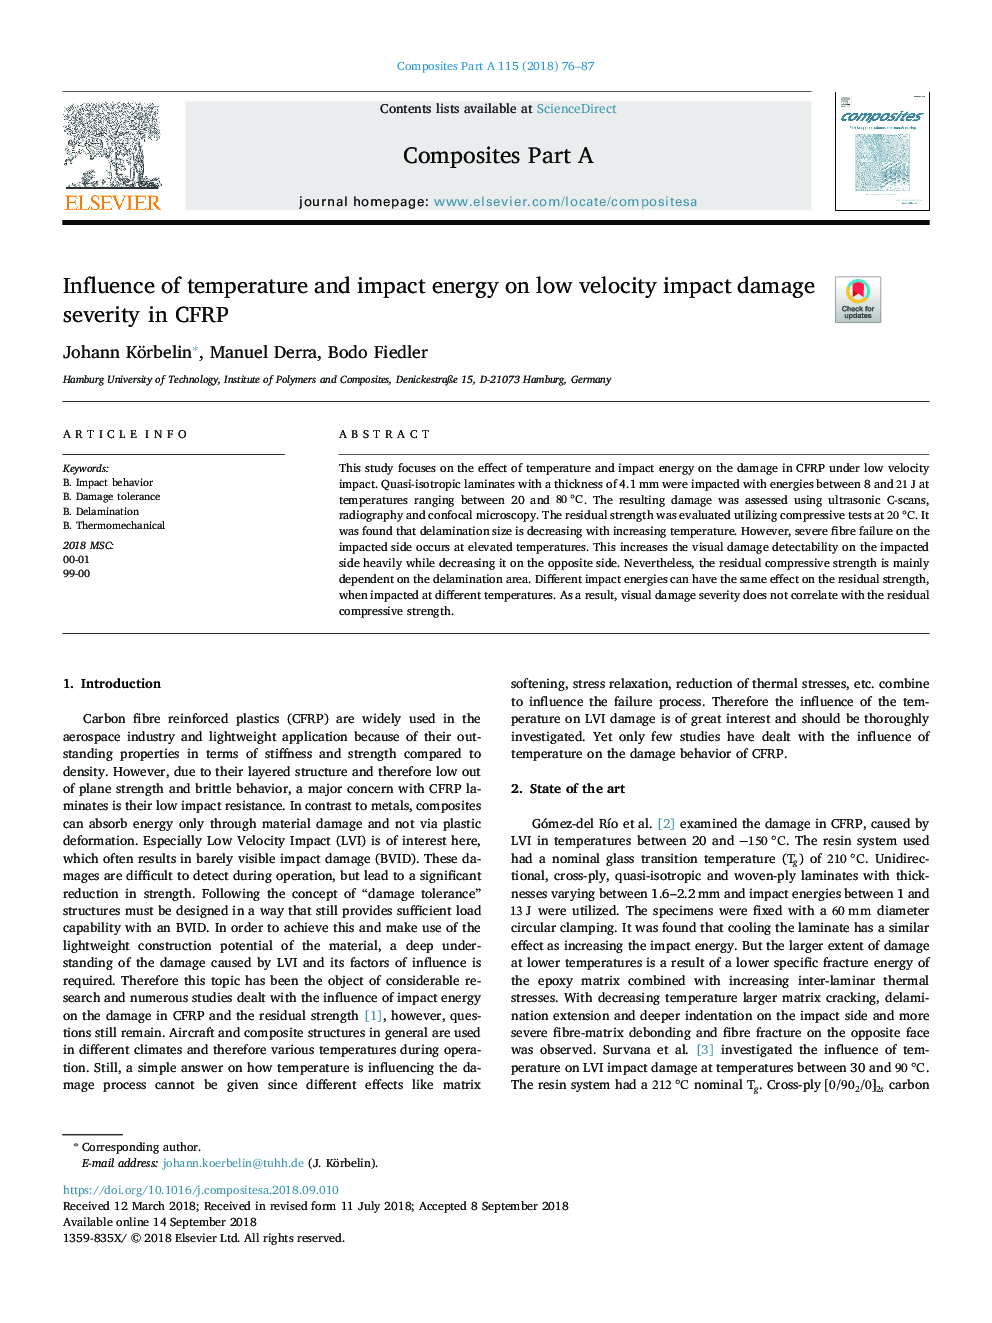 Influence of temperature and impact energy on low velocity impact damage severity in CFRP